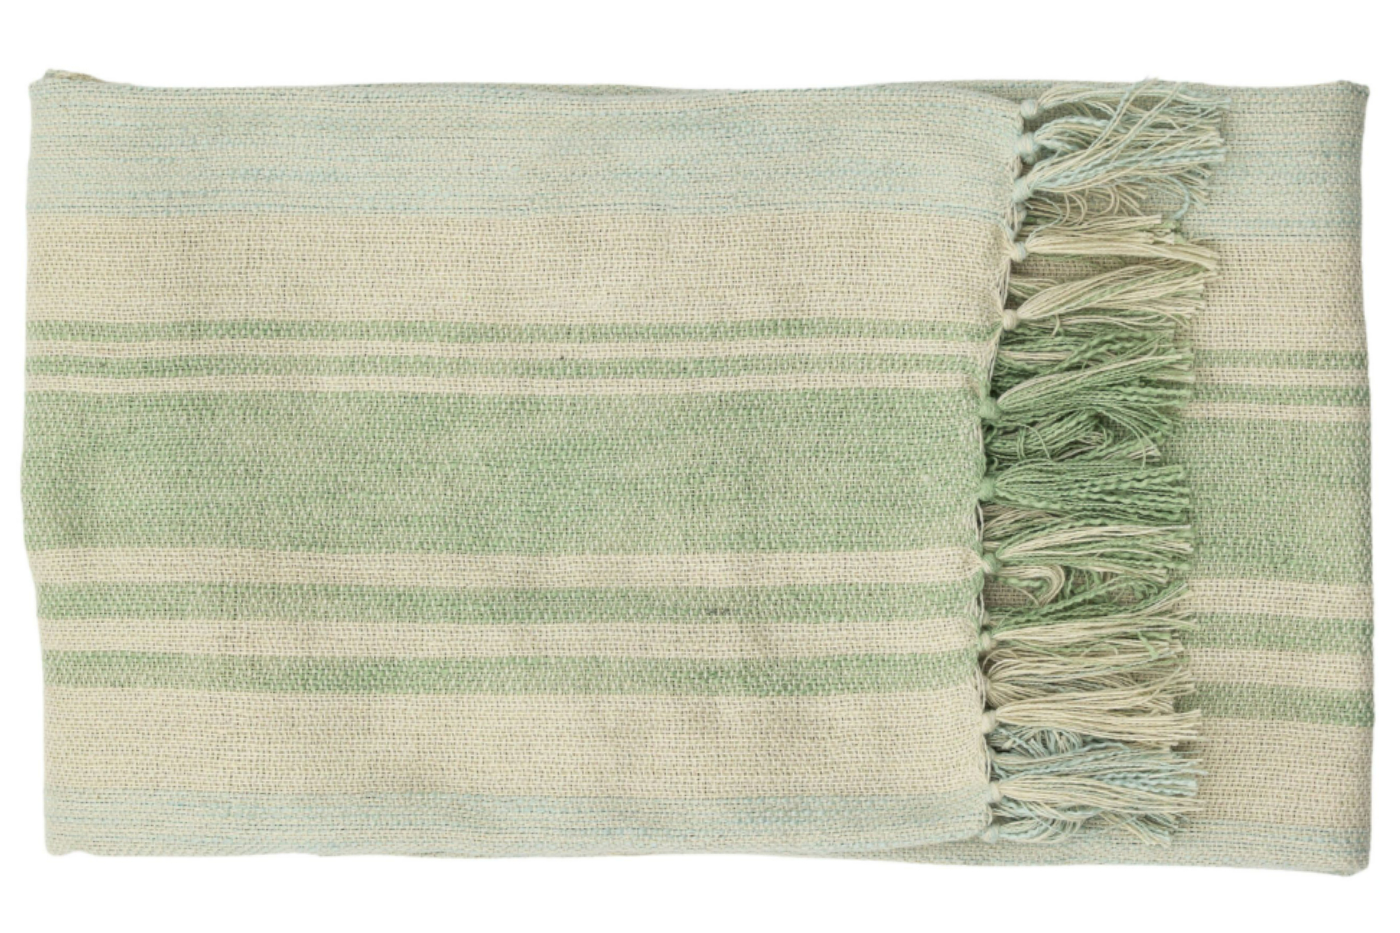 View Green Simply Florida Stripe Woven Throw With Fringe 1700 x 1300mm information